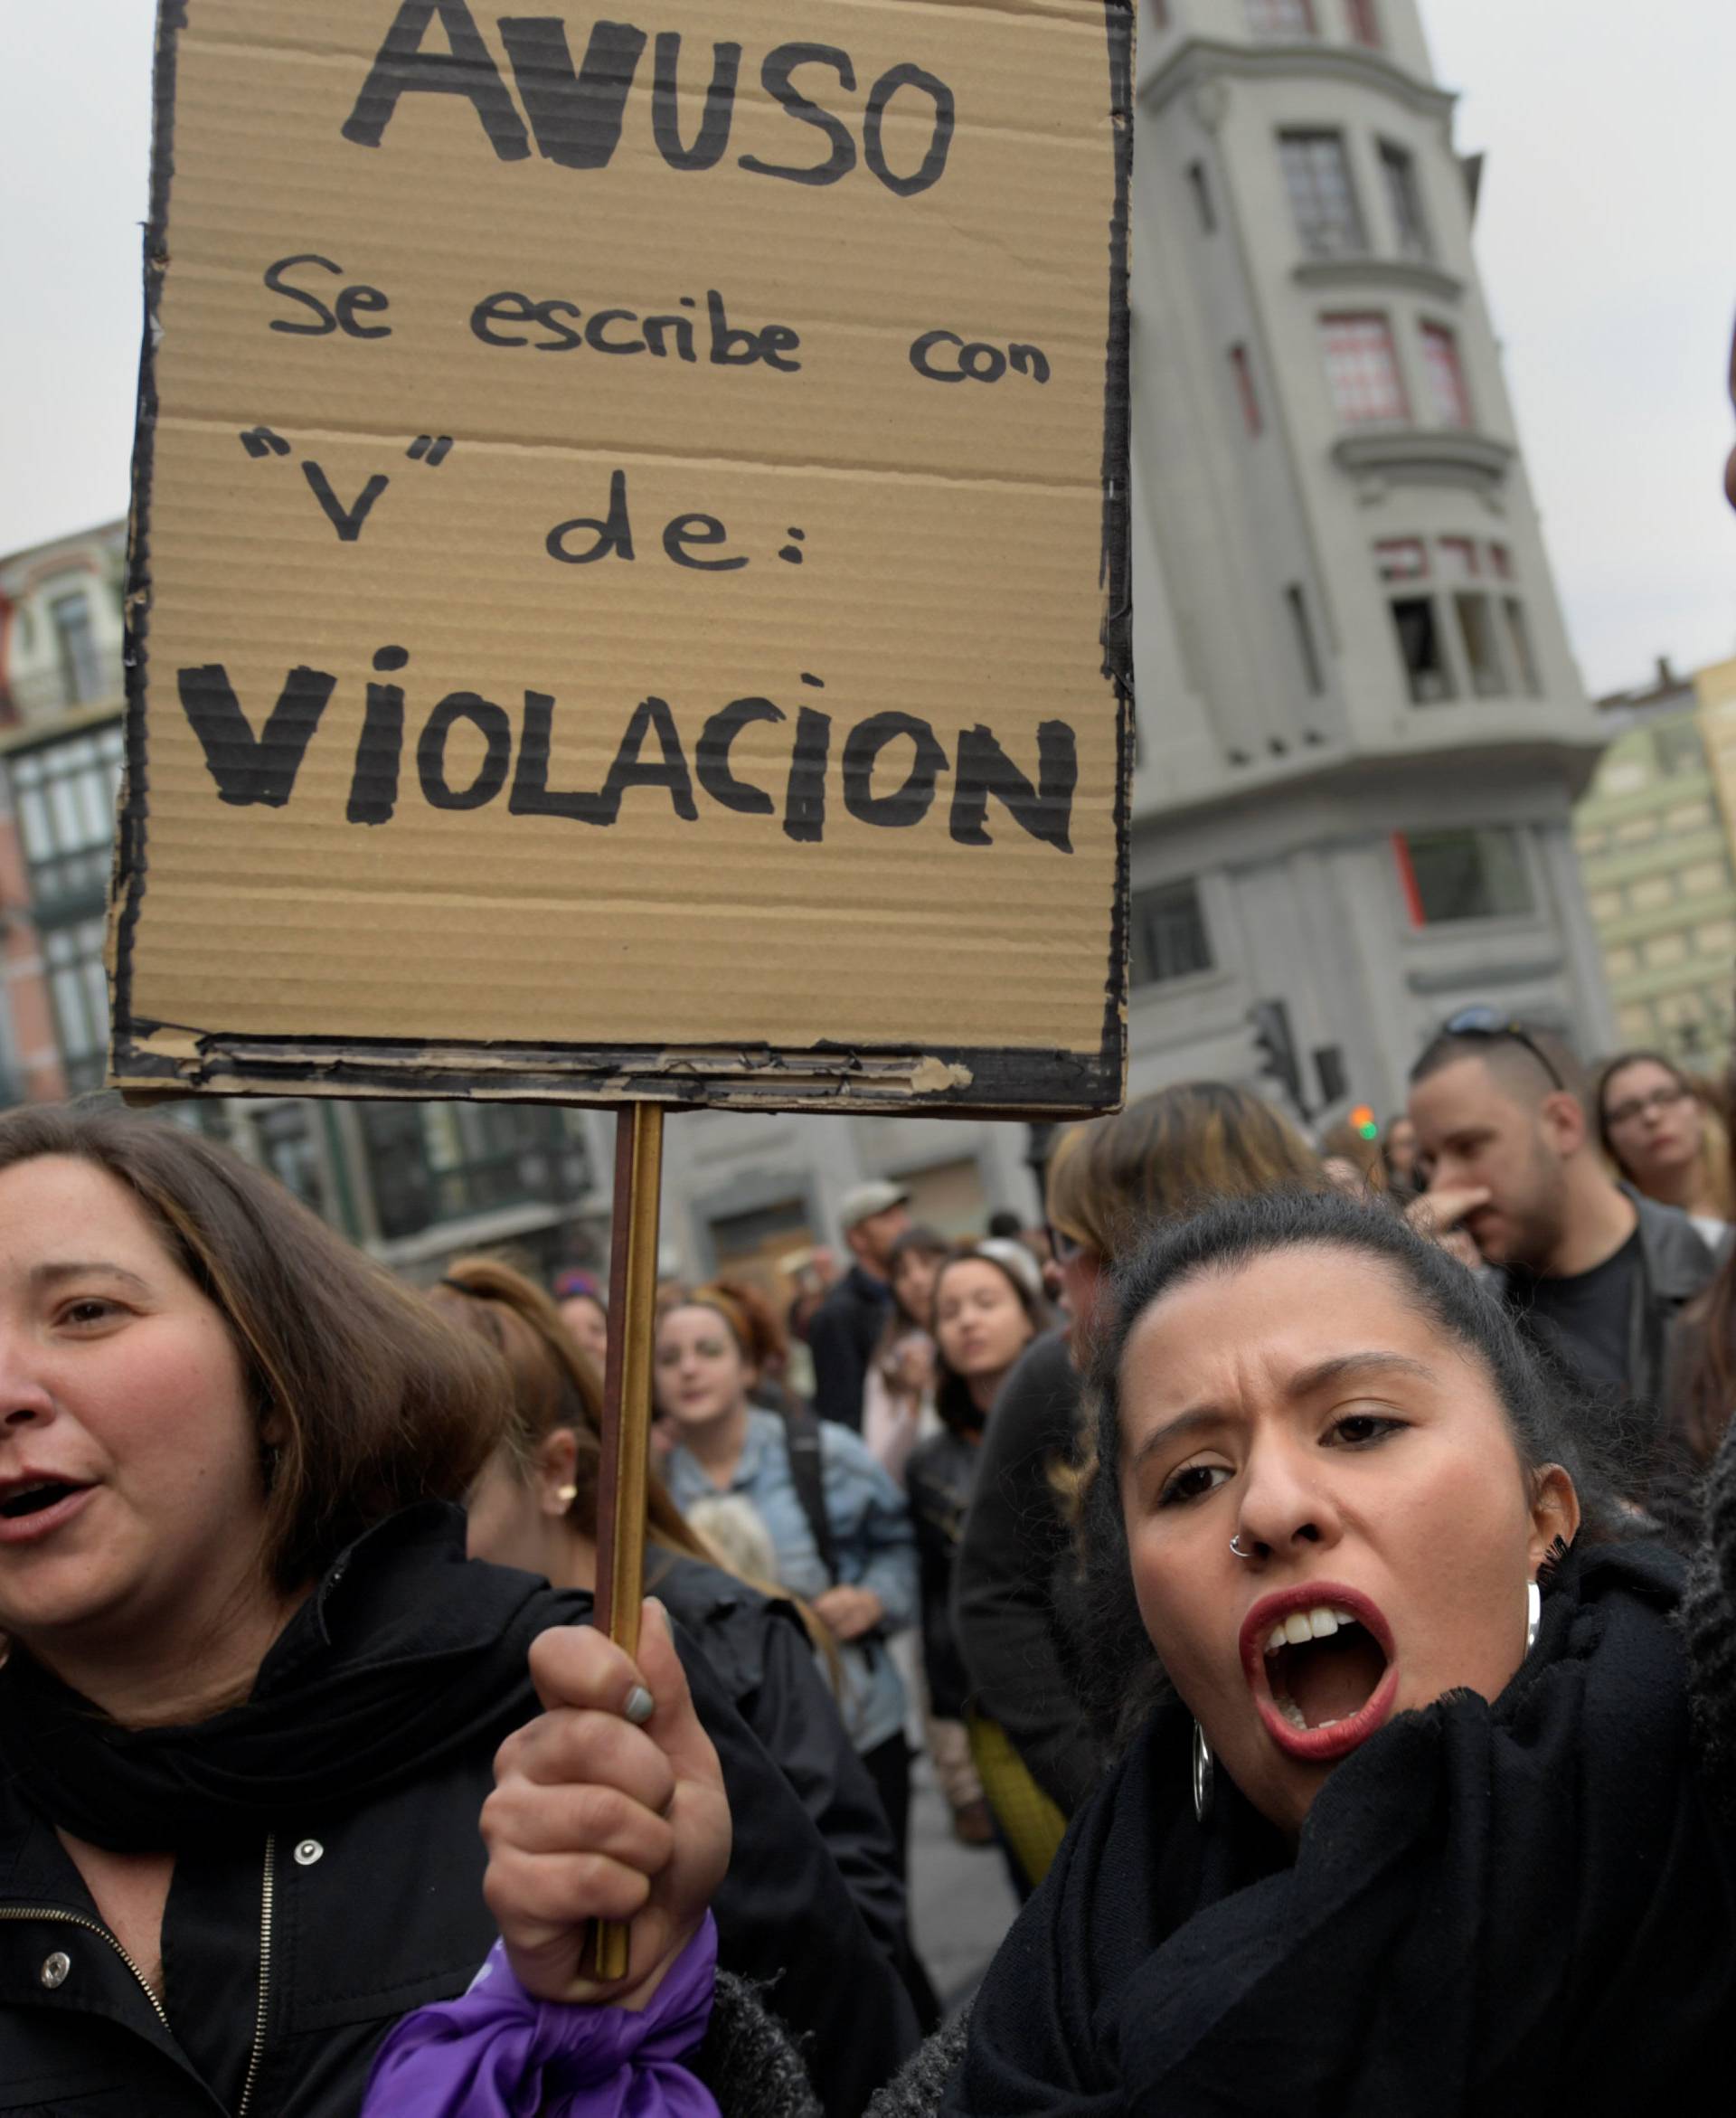 People shout slogans during a protest after a Spanish court condemned five men accused of the group rape of an 18-year-old woman in Oviedo